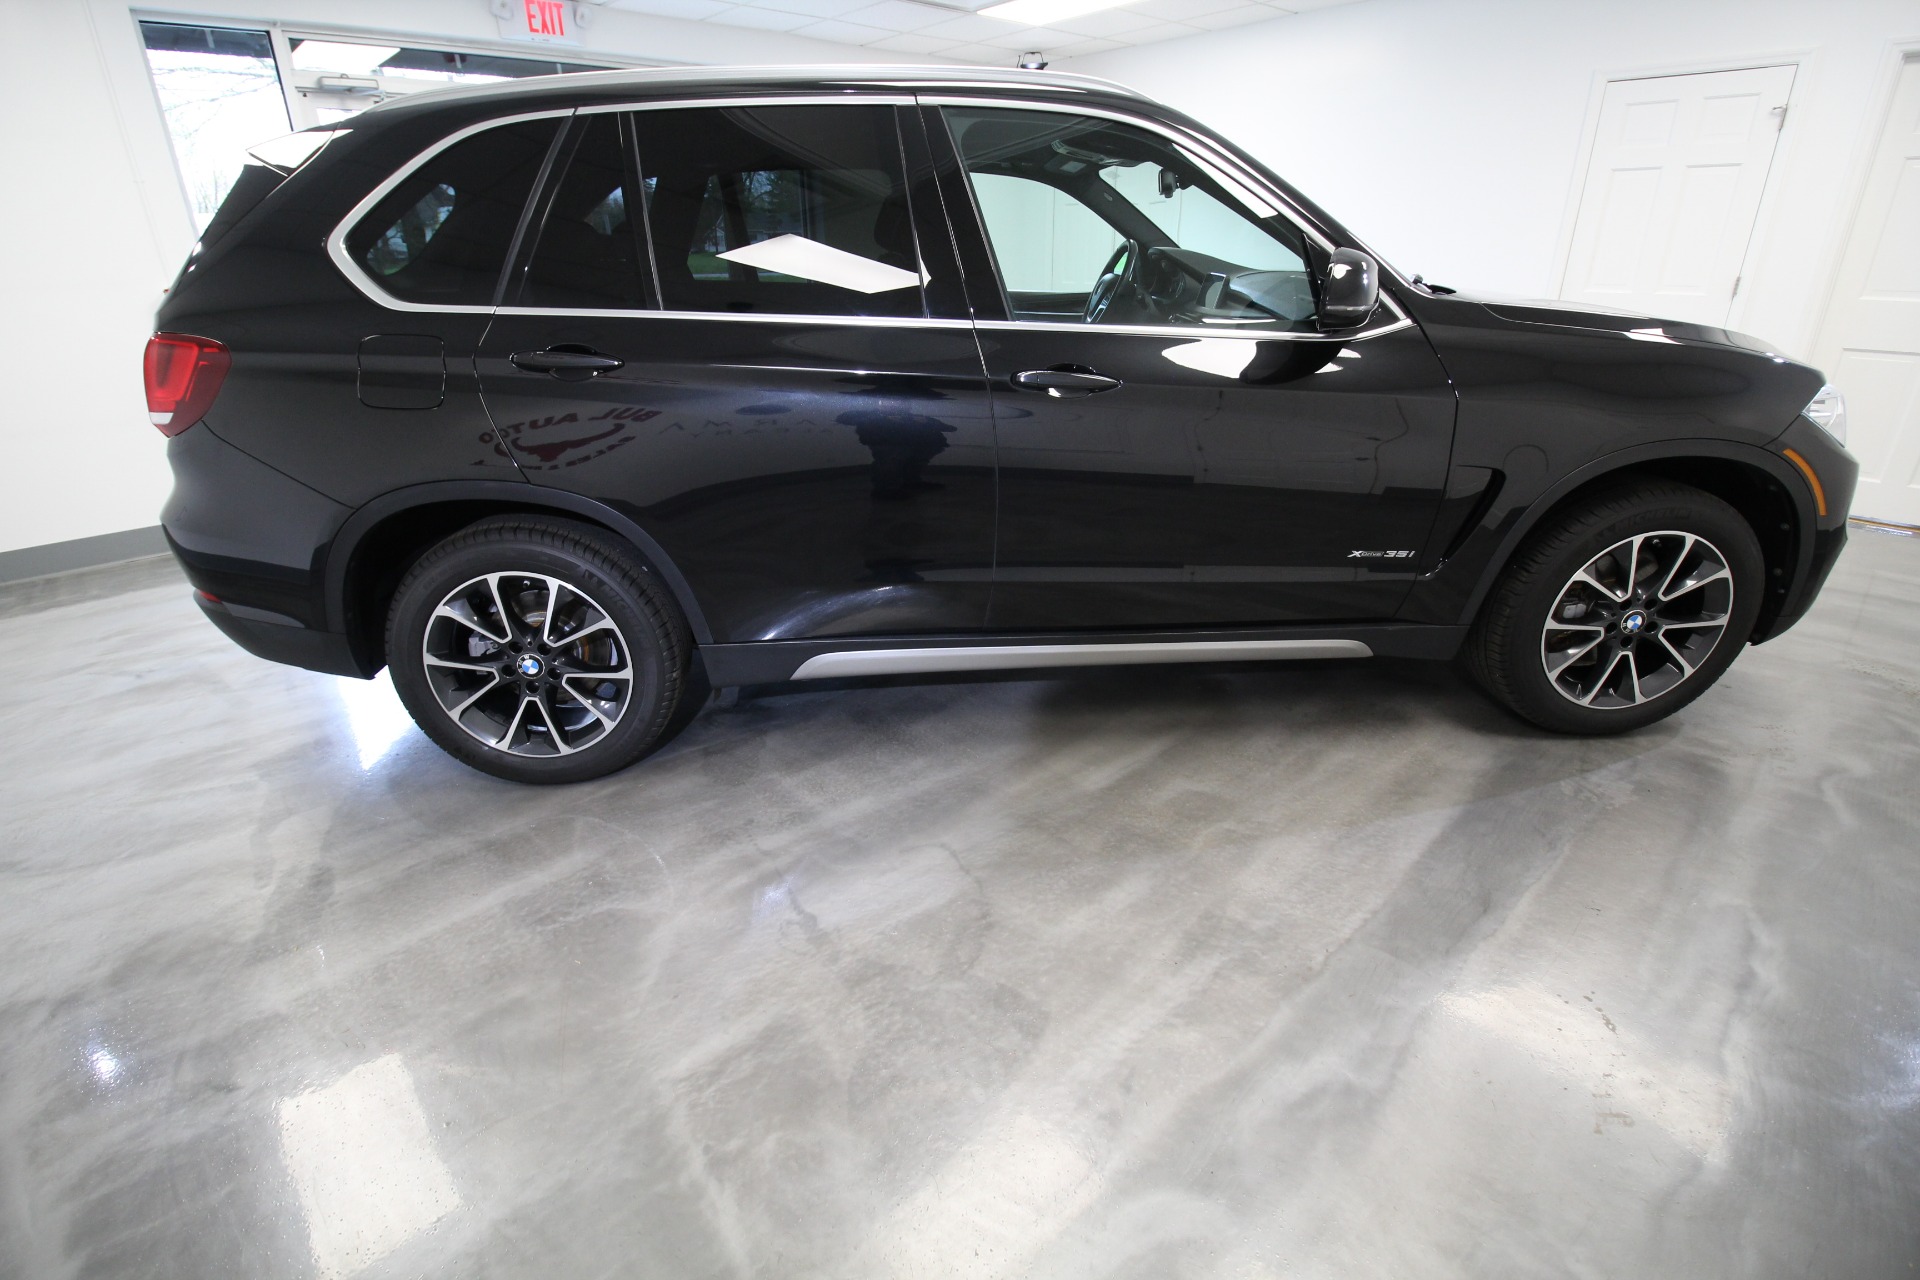 Used 2017 Black Sapphire Metallic BMW X5 xDrive35i LOADED WITH OPTIONS VERY CLEAN | Albany, NY